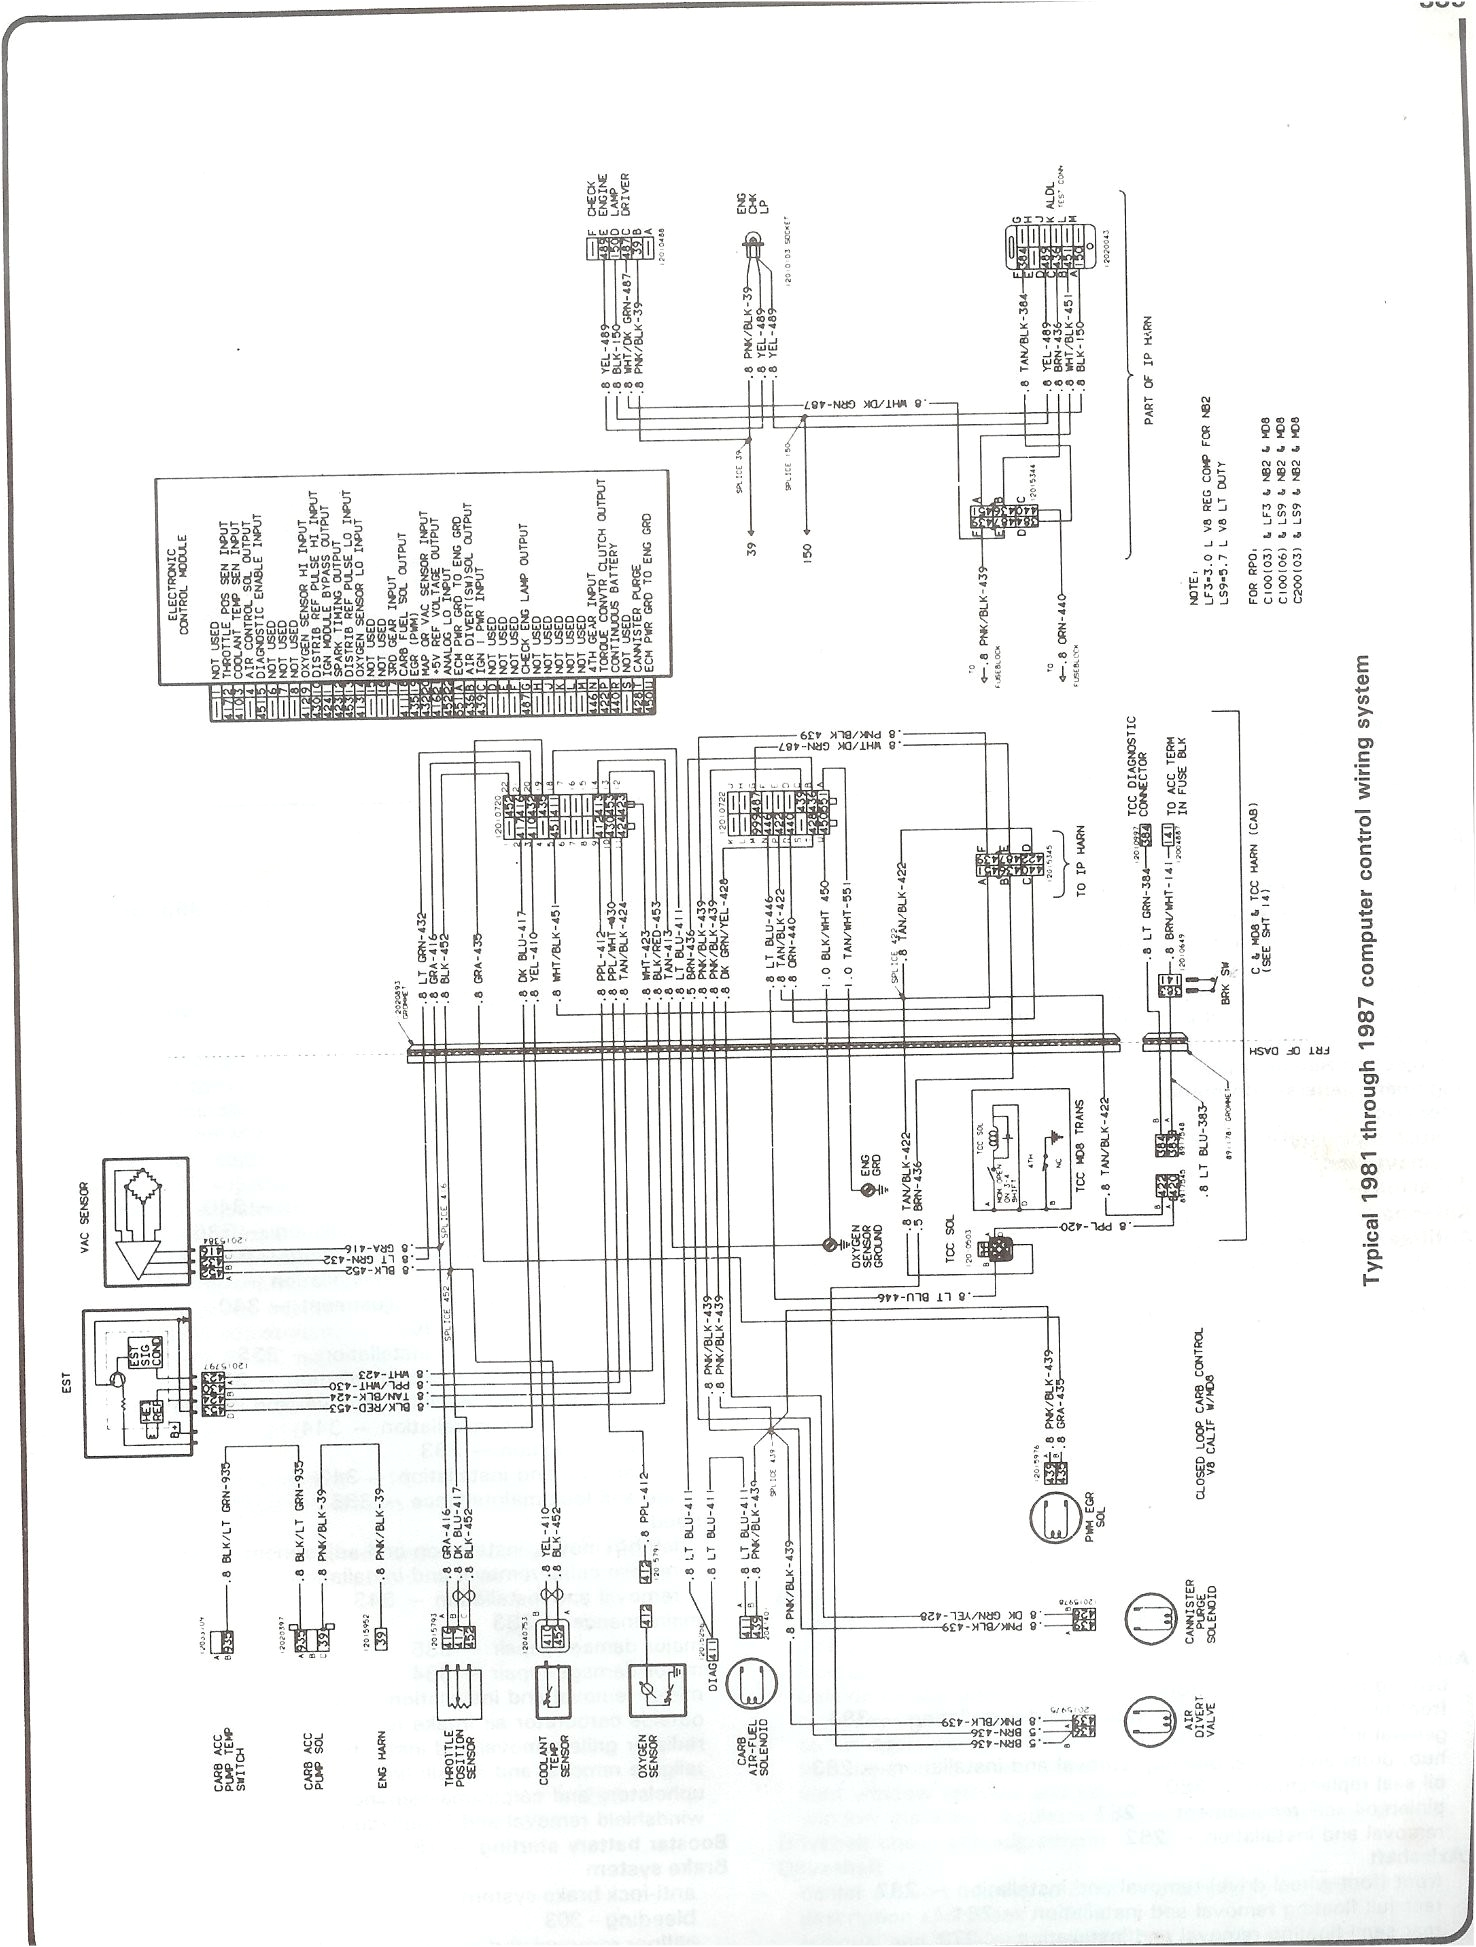 wiring diagram for 82 chevy c 10 wiring diagram blog wiring diagram 1979 chevrolet c10 get free image about wiring